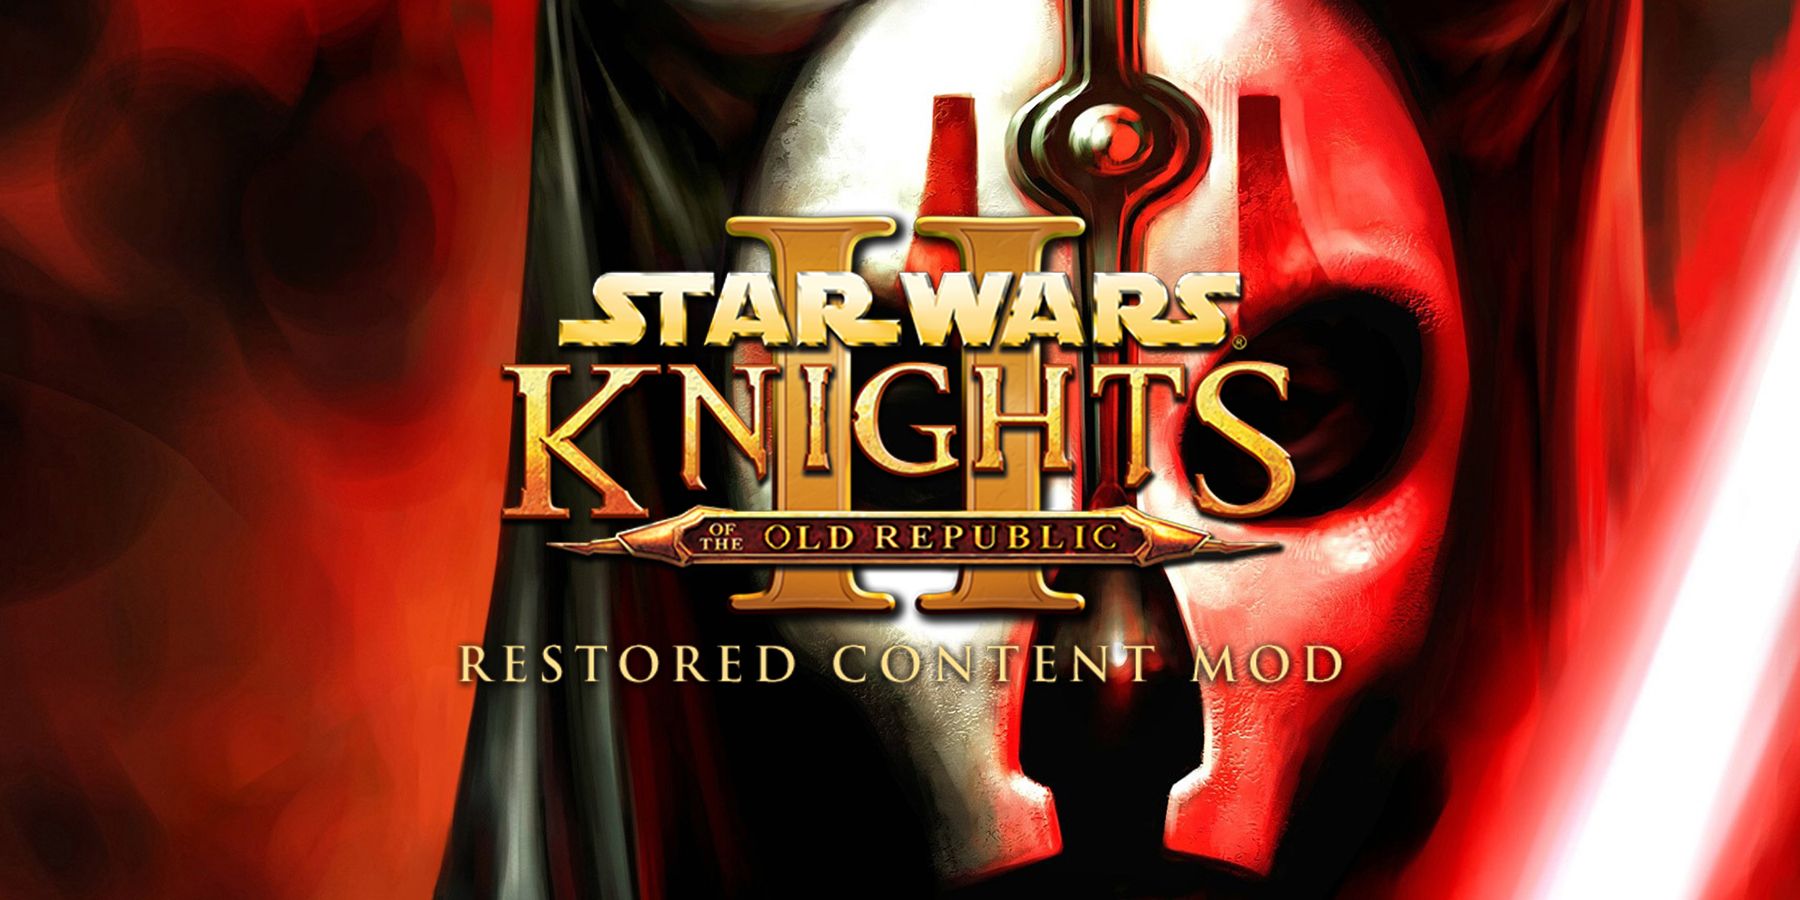 Star wars knight of the old republic 2 русификатор steam фото 108